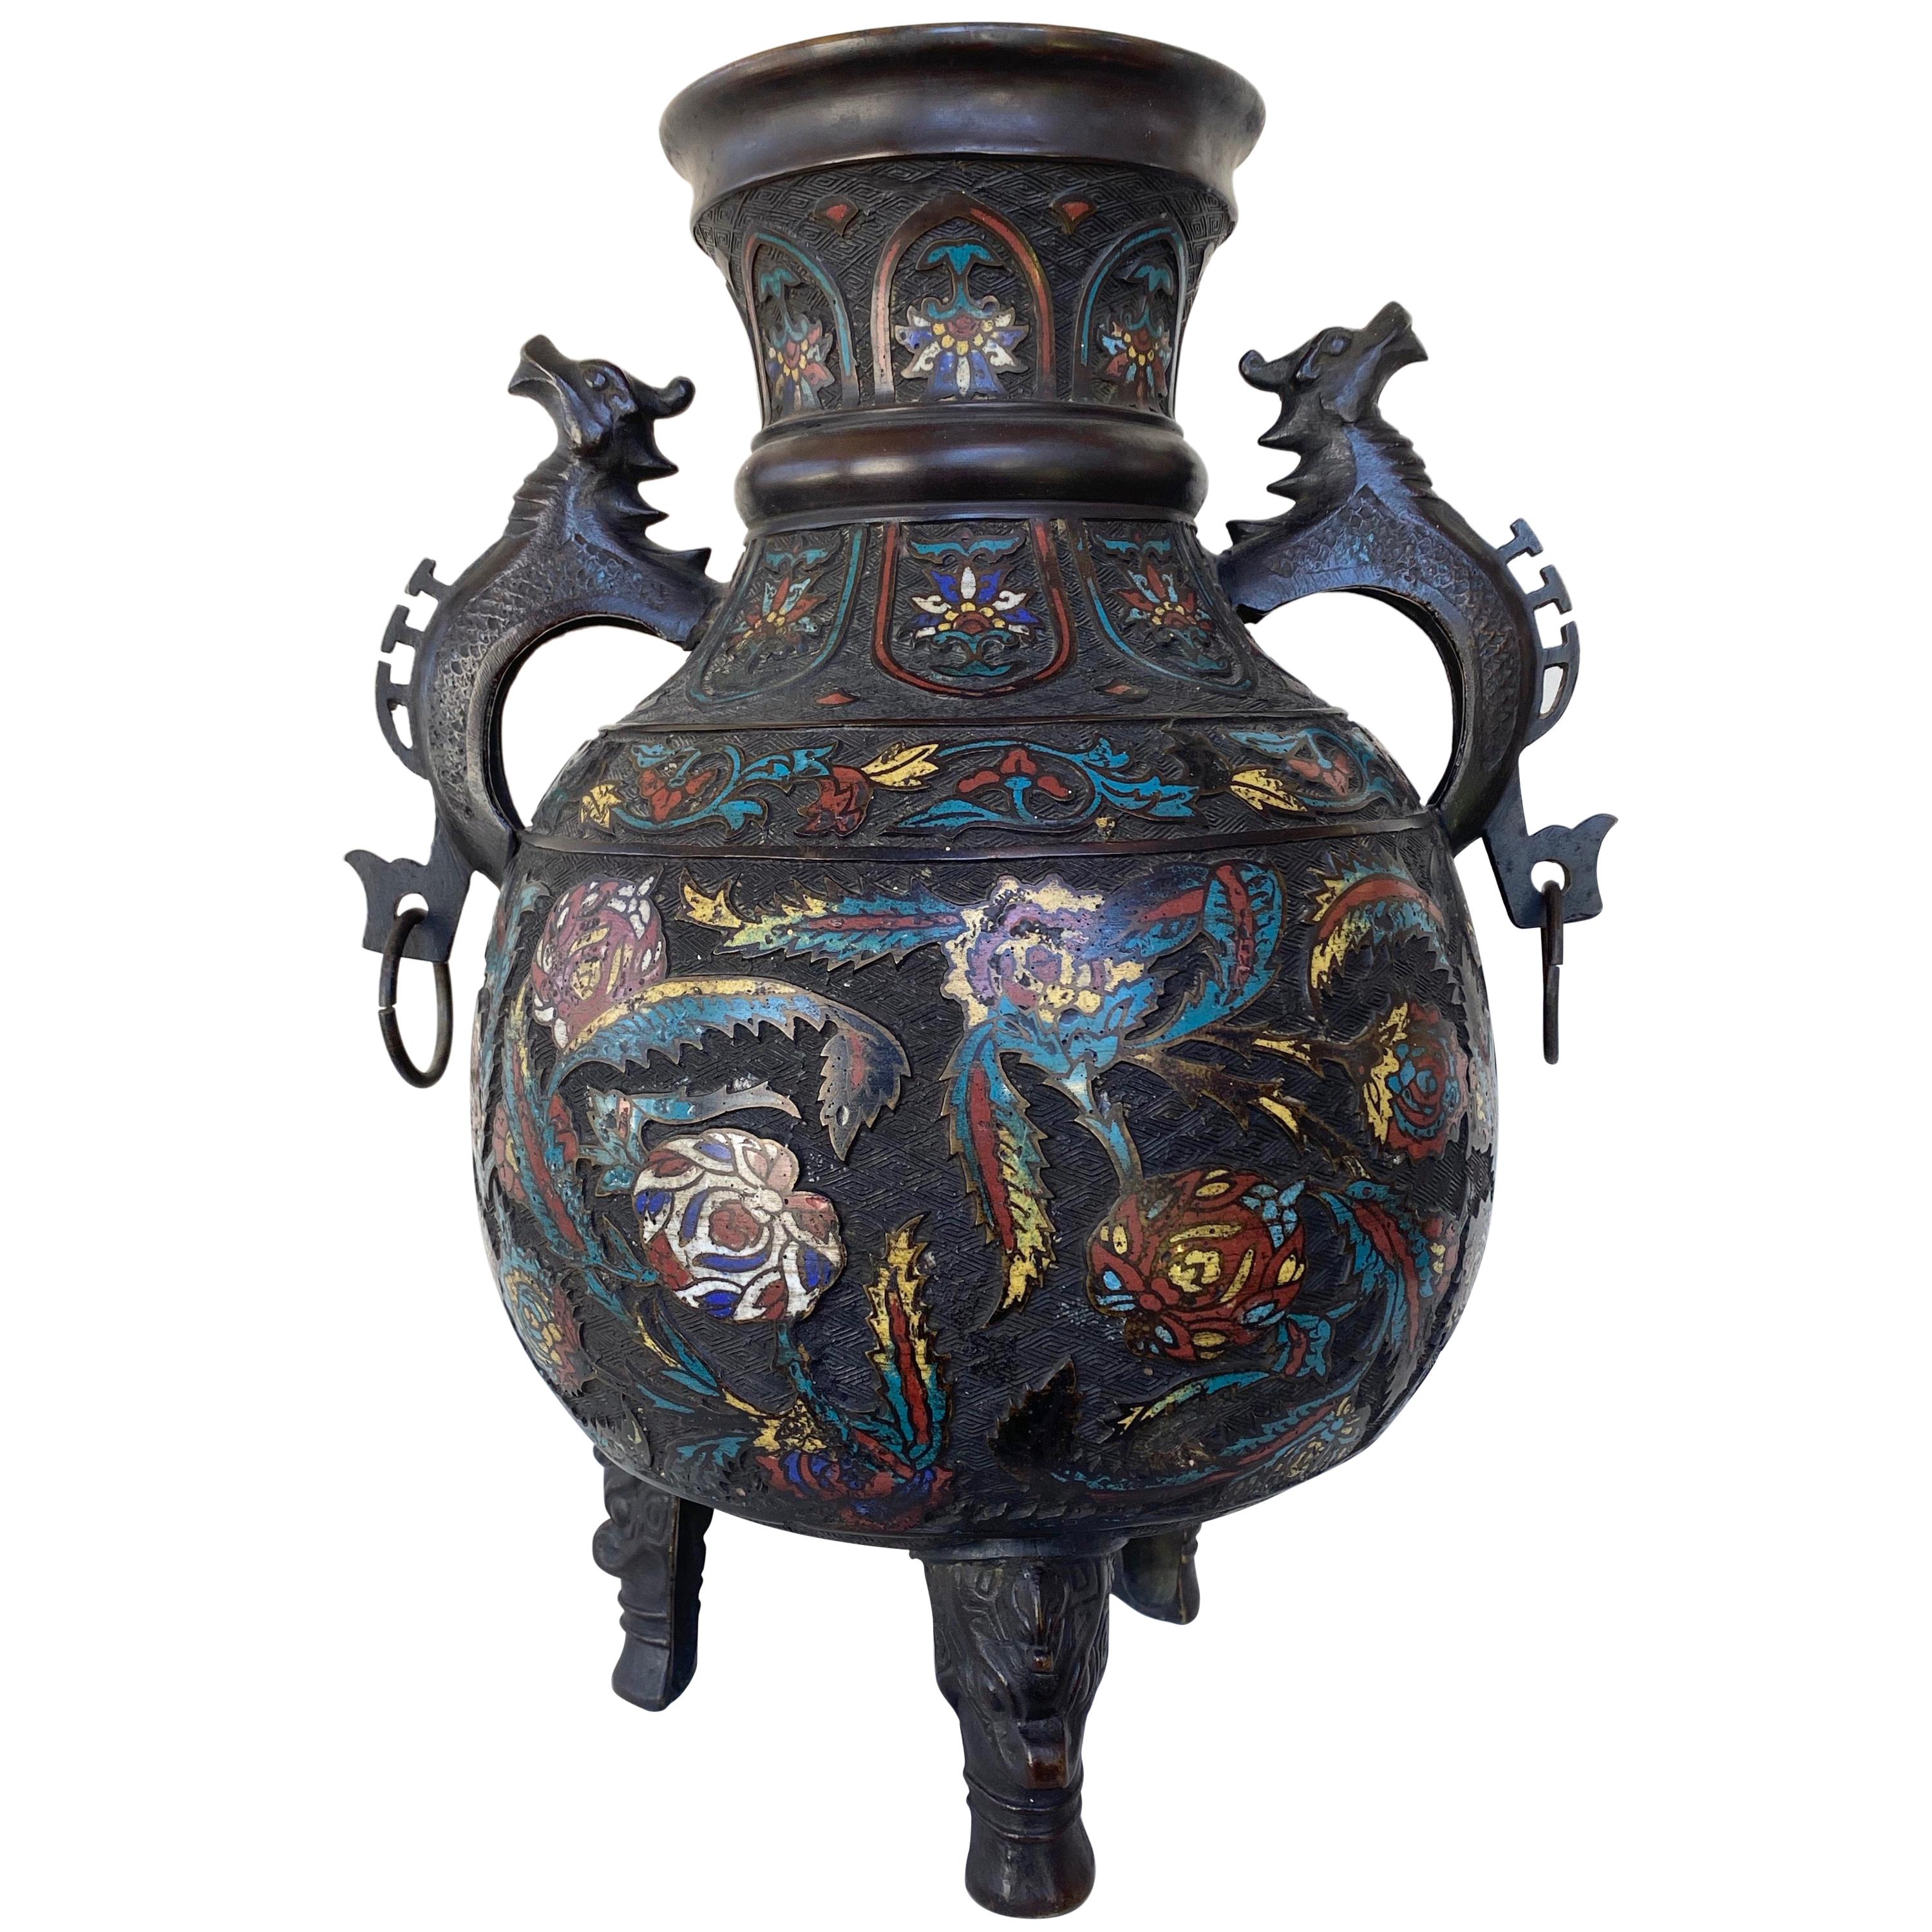 Large Chinese Qing Dynasty Bronze Cloisonné Urn with Dragon Handles, 19th C.